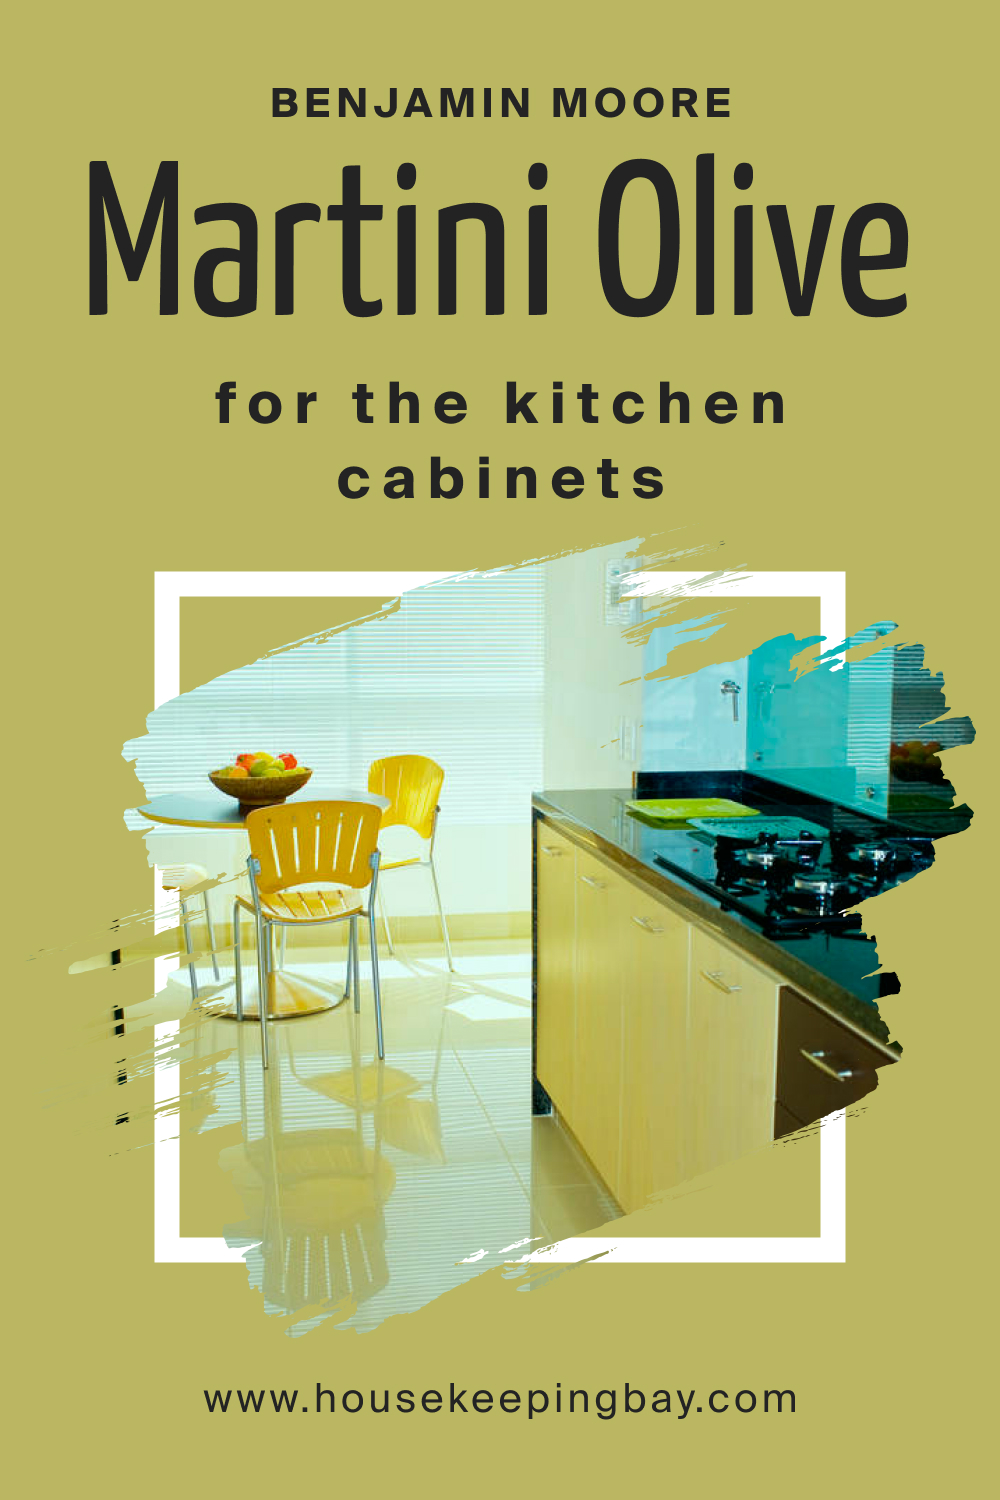 How to Use Martini Olive CSP-890 on the Kitchen Cabinets?